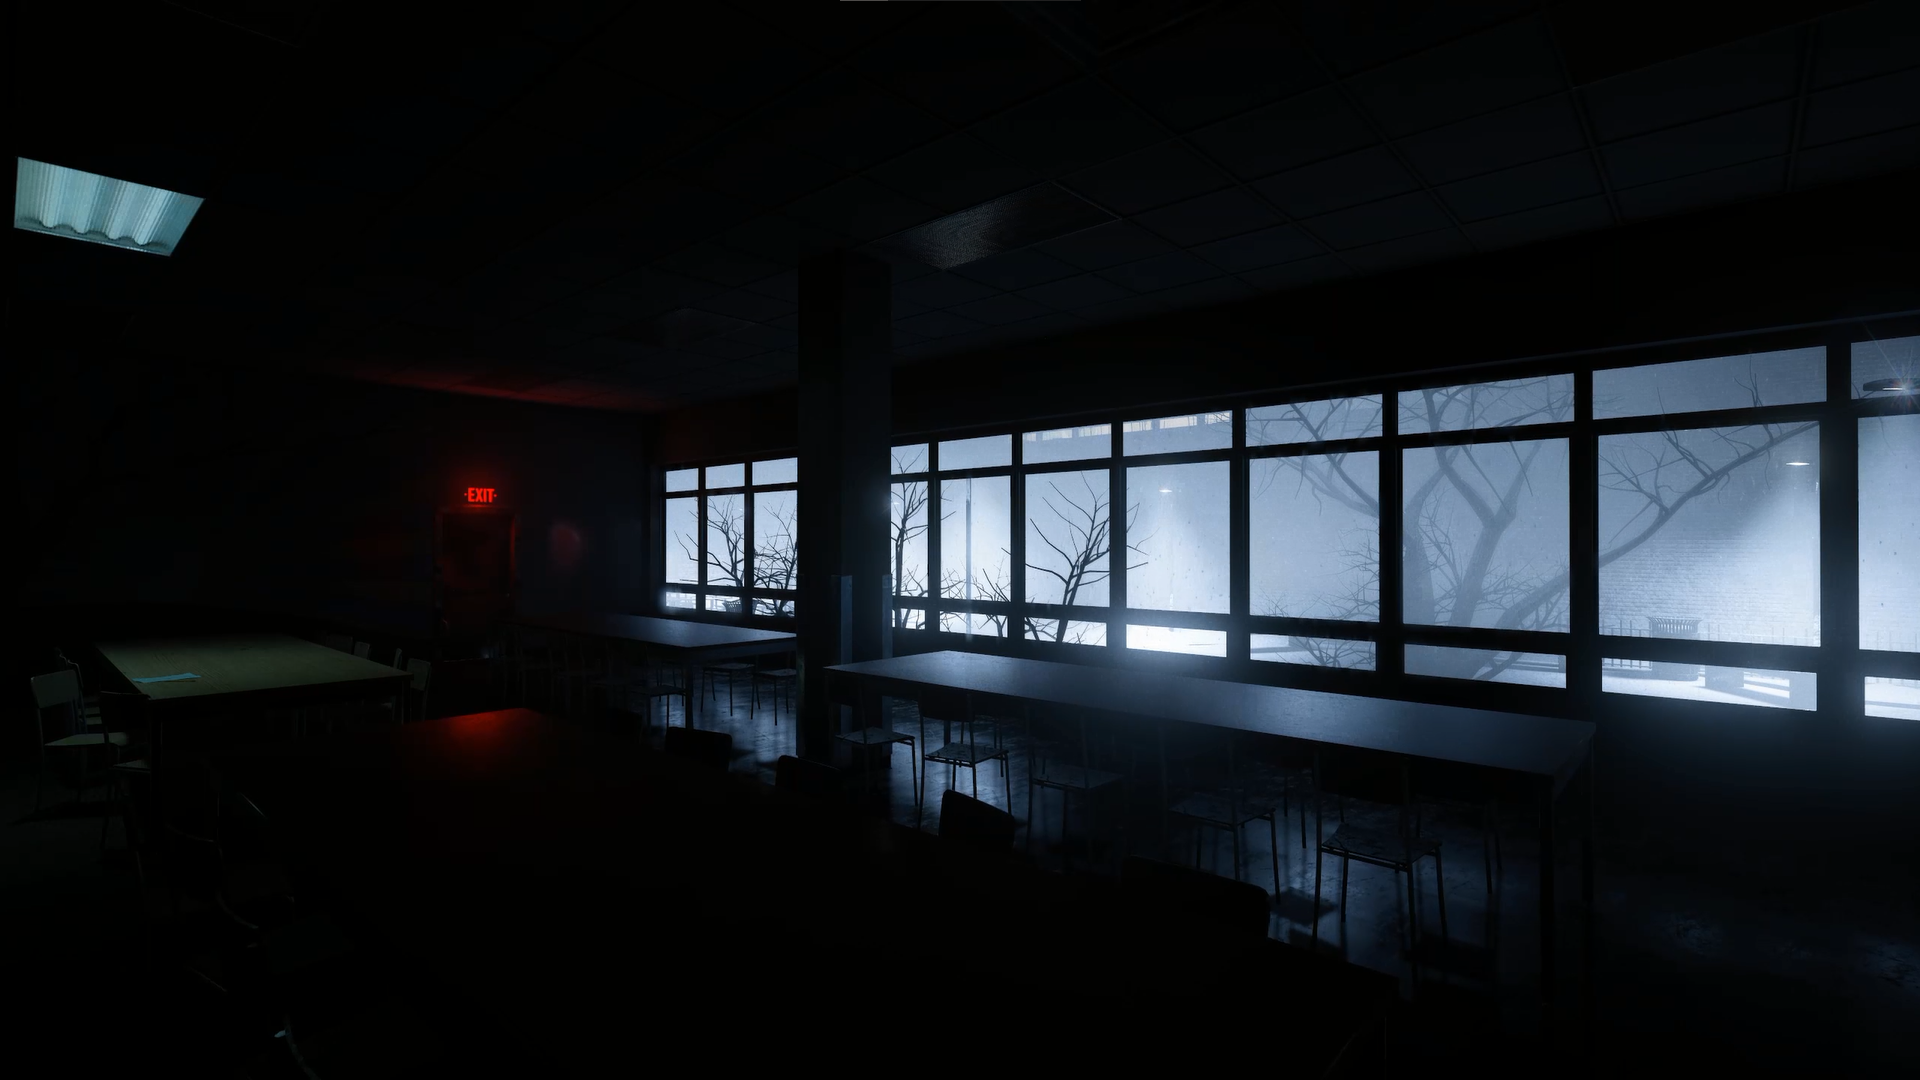 General 1920x1080 Outlast 2 cafeteria  eerie digital art low light video games video game art window interior ceiling lights chair branch trees